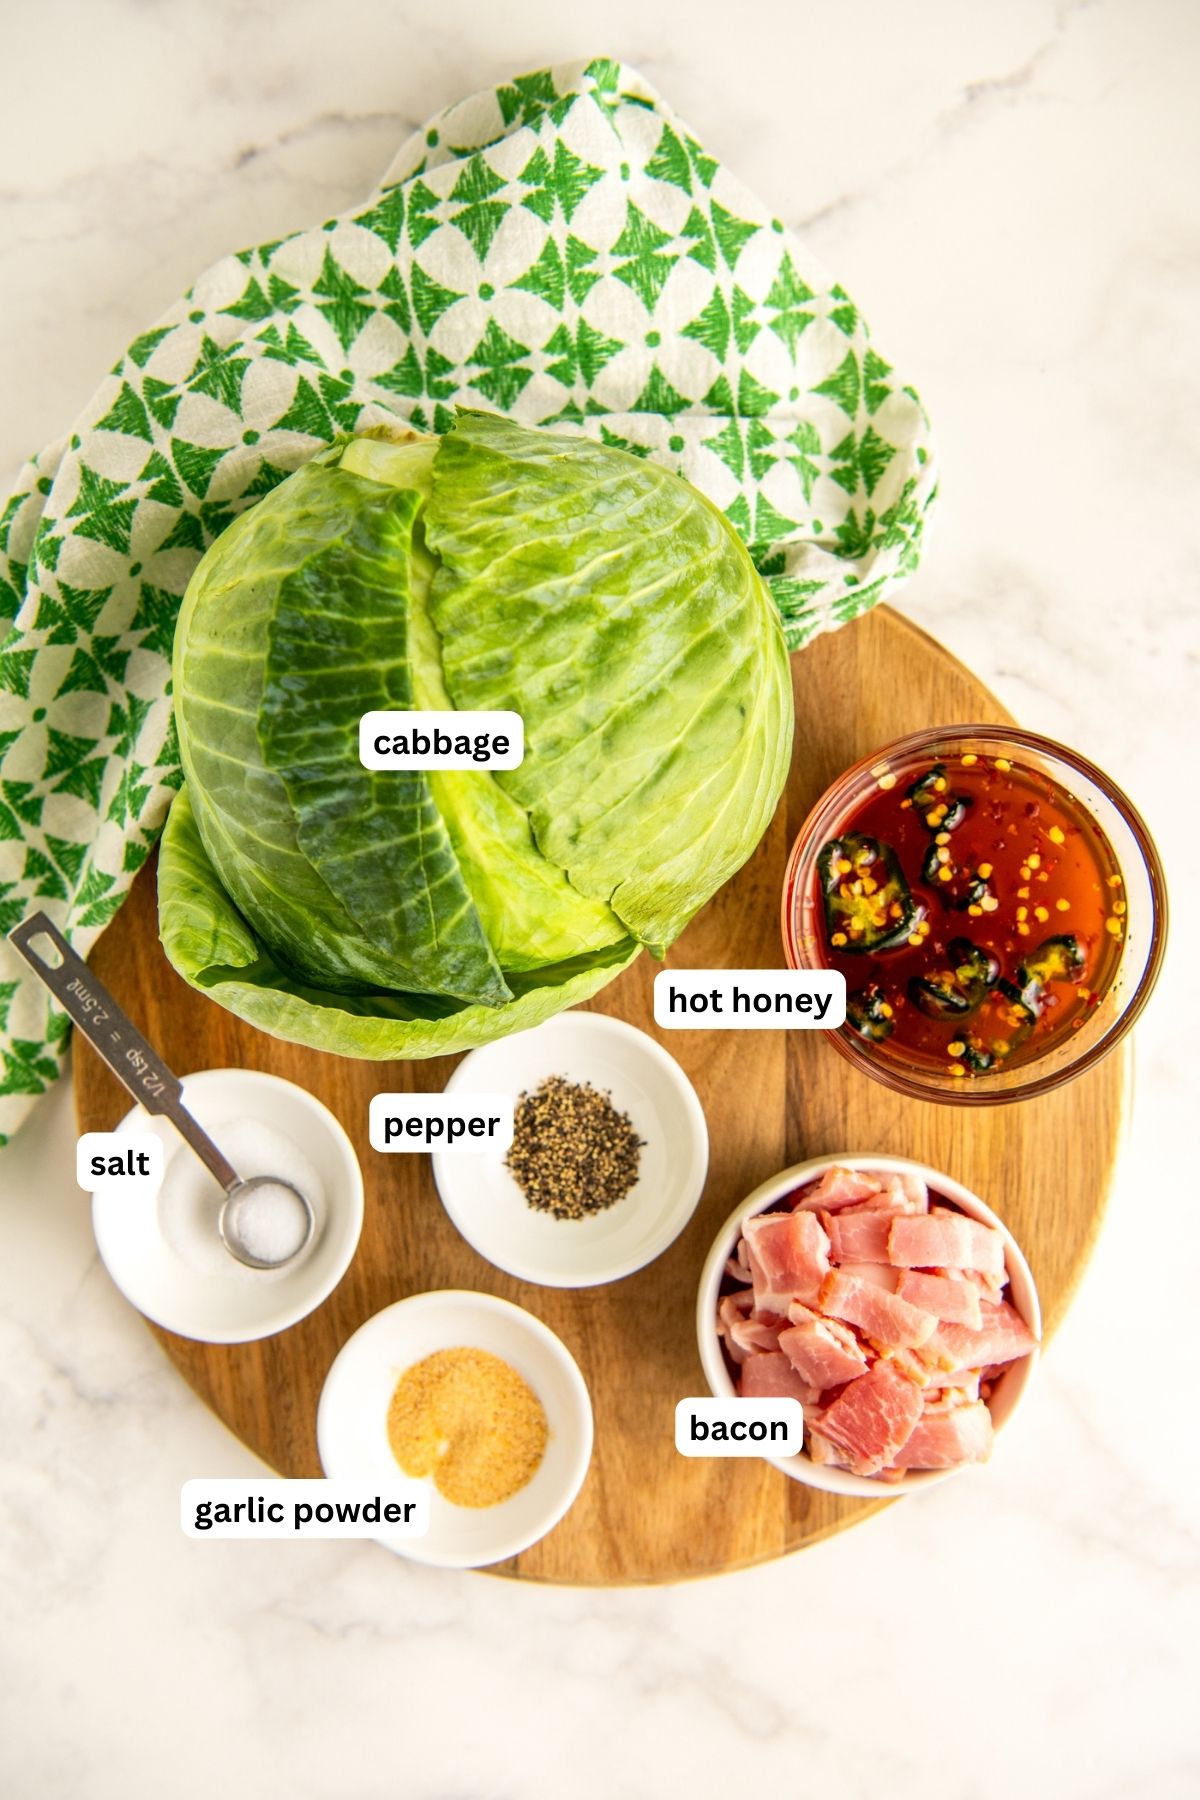 Ingredients for fried cabbage recipe arranged on a cutting board. From top to bottom: green cabbage, hot honey, salt, pepper, bacon and garlic powder. 